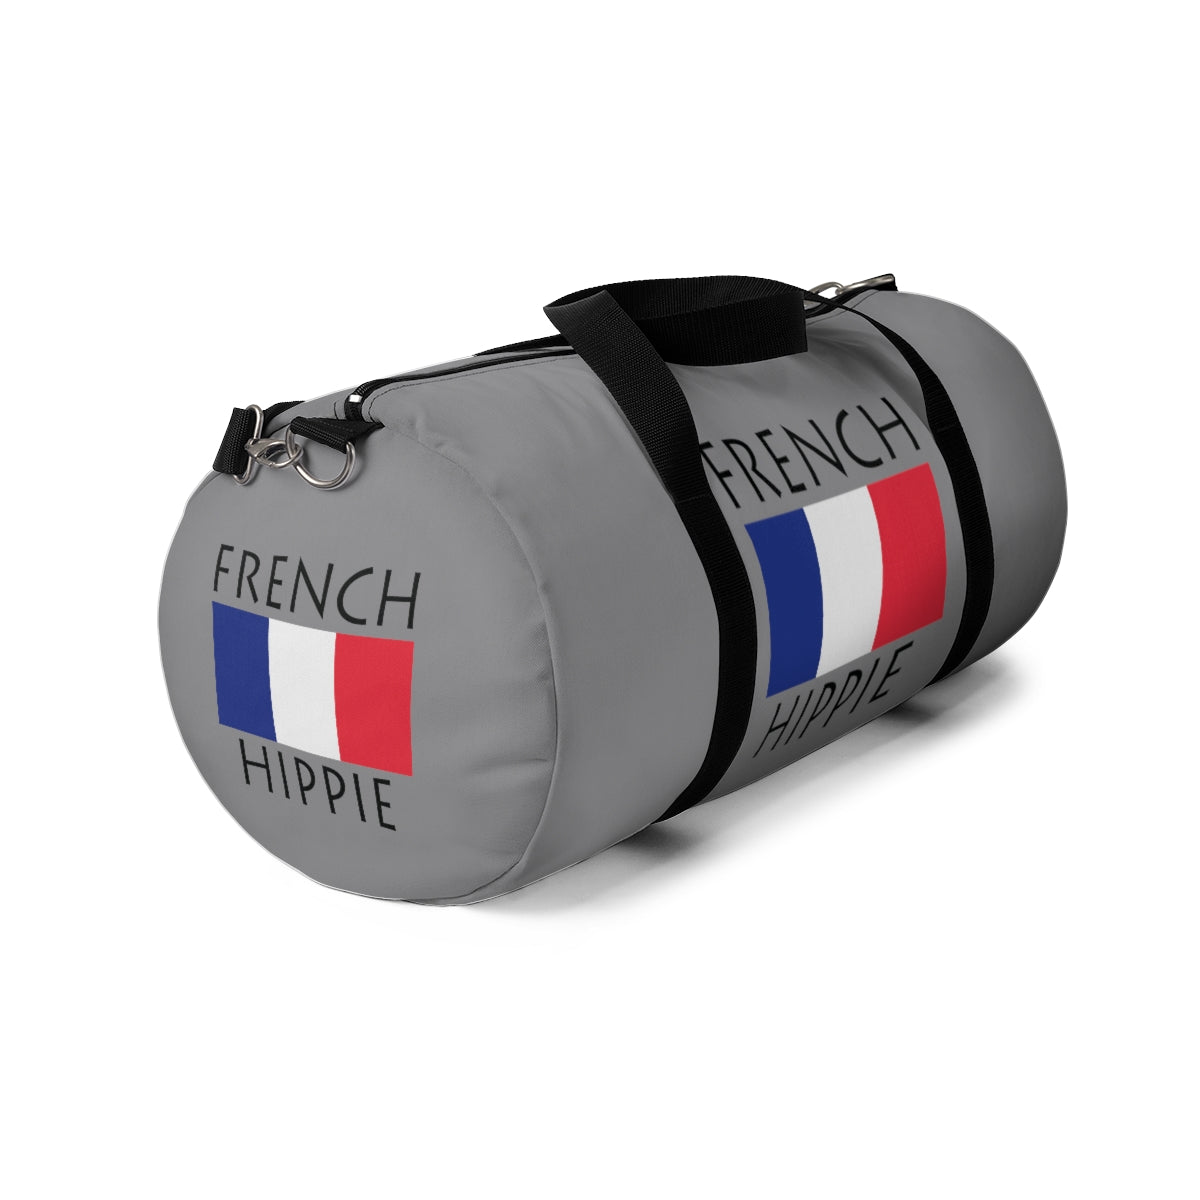  Stately Wear's French Flag Hippie duffel bag is colorful, iconic and stylish. We are a Katie Couric Shop partner. This duffel bag is the perfect accessory as a beach bag, ski bag, travel bag, shopping bag & gym bag, Pilates bag or yoga bag. Custom made one-at-a-time with environmentally friendly biodegradable inks & dyes. 2 sizes to choose. Stately Wear's bags are very durable, soft and colorful duffels with durable strap.